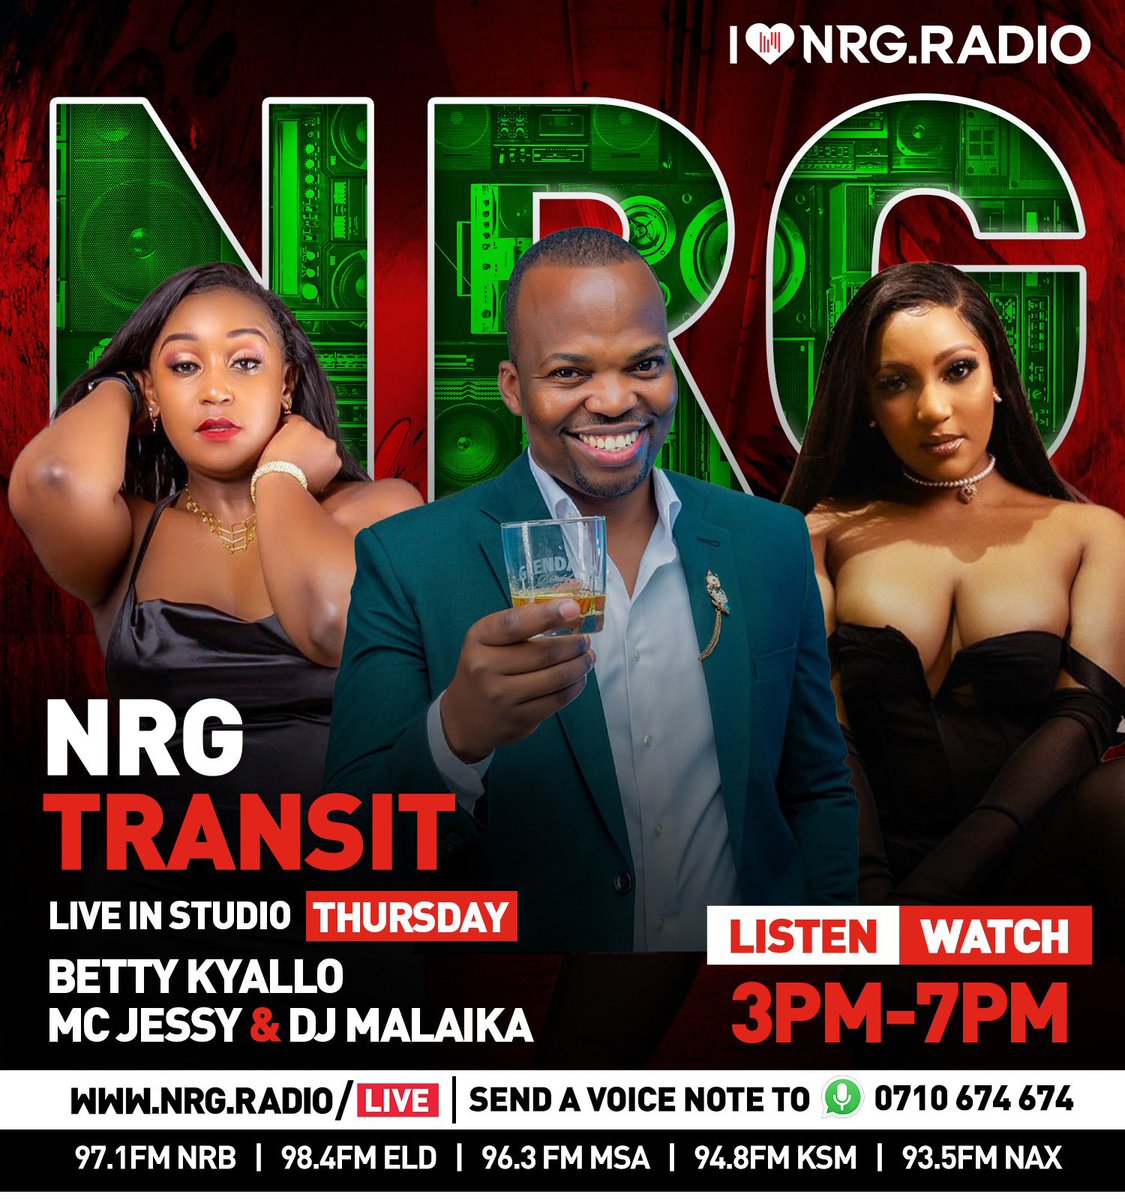 Taking over the Transit show😎 It going down🔥🔥 Tune in to catch the littest and baddest radio crew in town🙌🏾🙌🏾 @jessythemc @djmalaika @bettymuteikyallo #NRGSexy5 #NRGTurn5